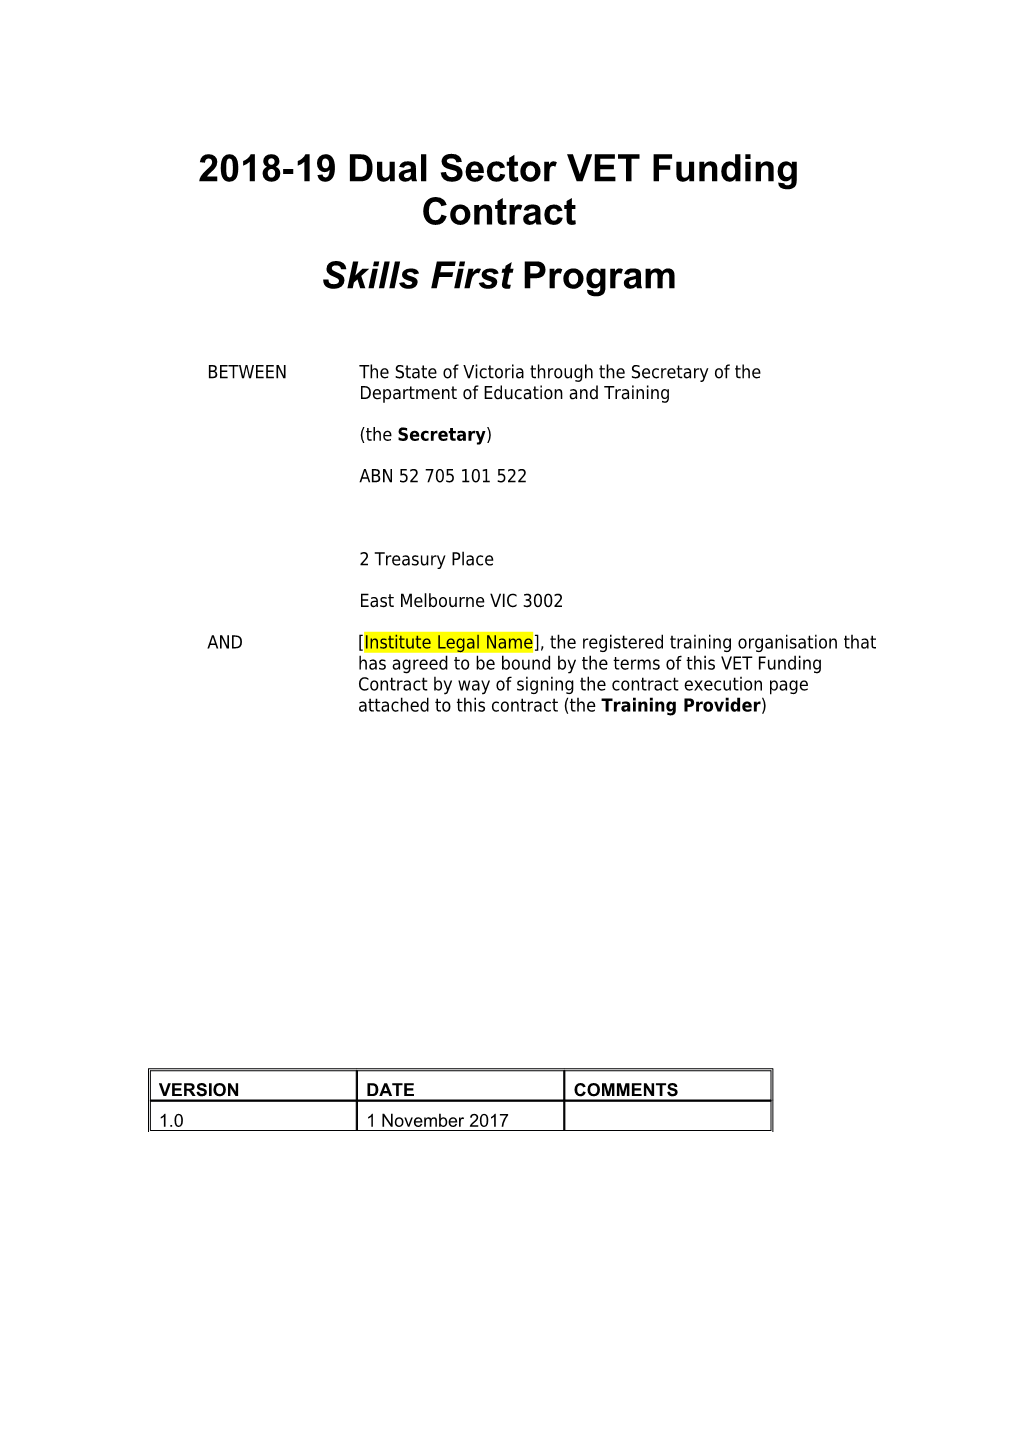 2018-19 Dual Sector VET Funding Contract - Skills First Program Version 1.0